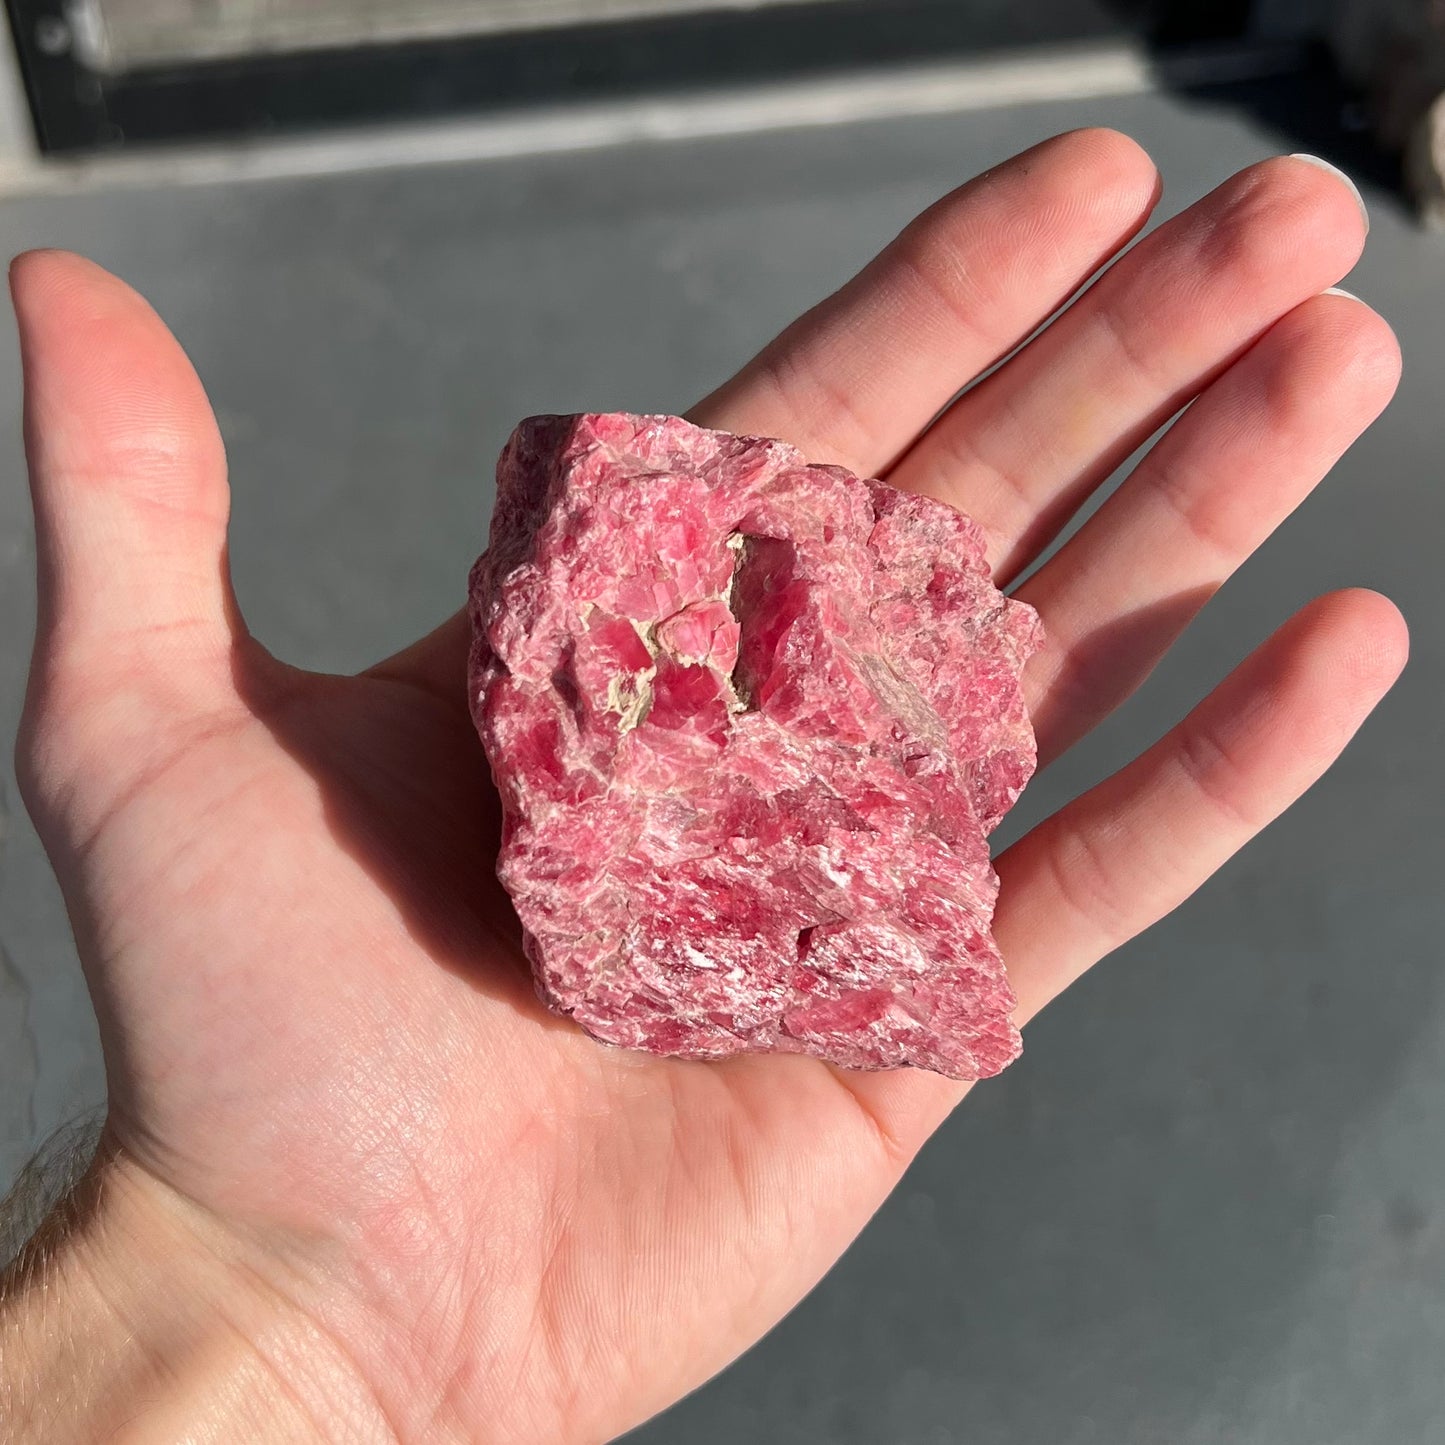 A rough pink rhodonite crystal specimen the size of a small fist.